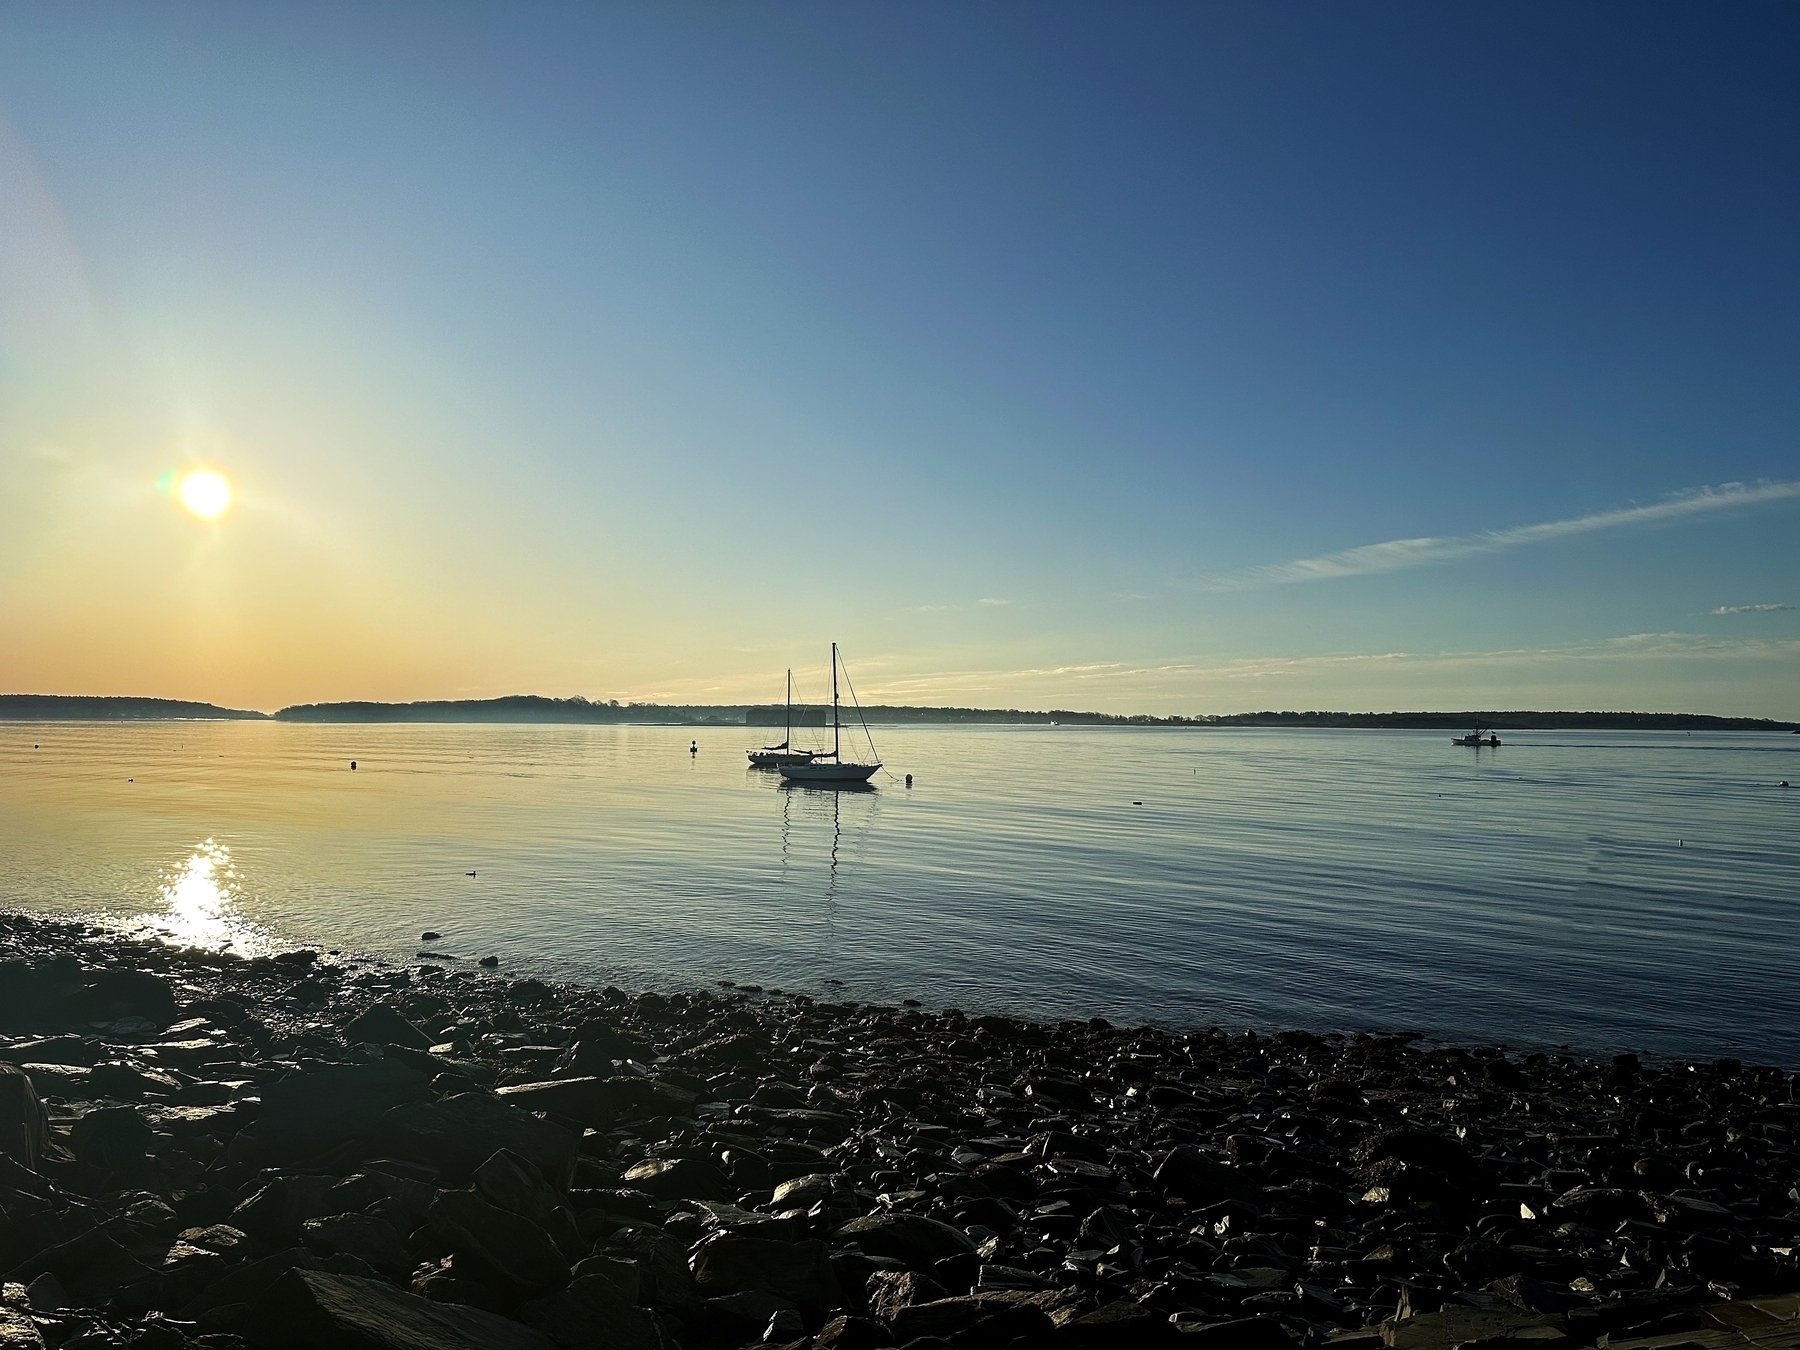 Sailboats rest on calm water at sunrise/sunset, with sun casting reflections; rocky shore in the foreground, clear skies above. No text is present.